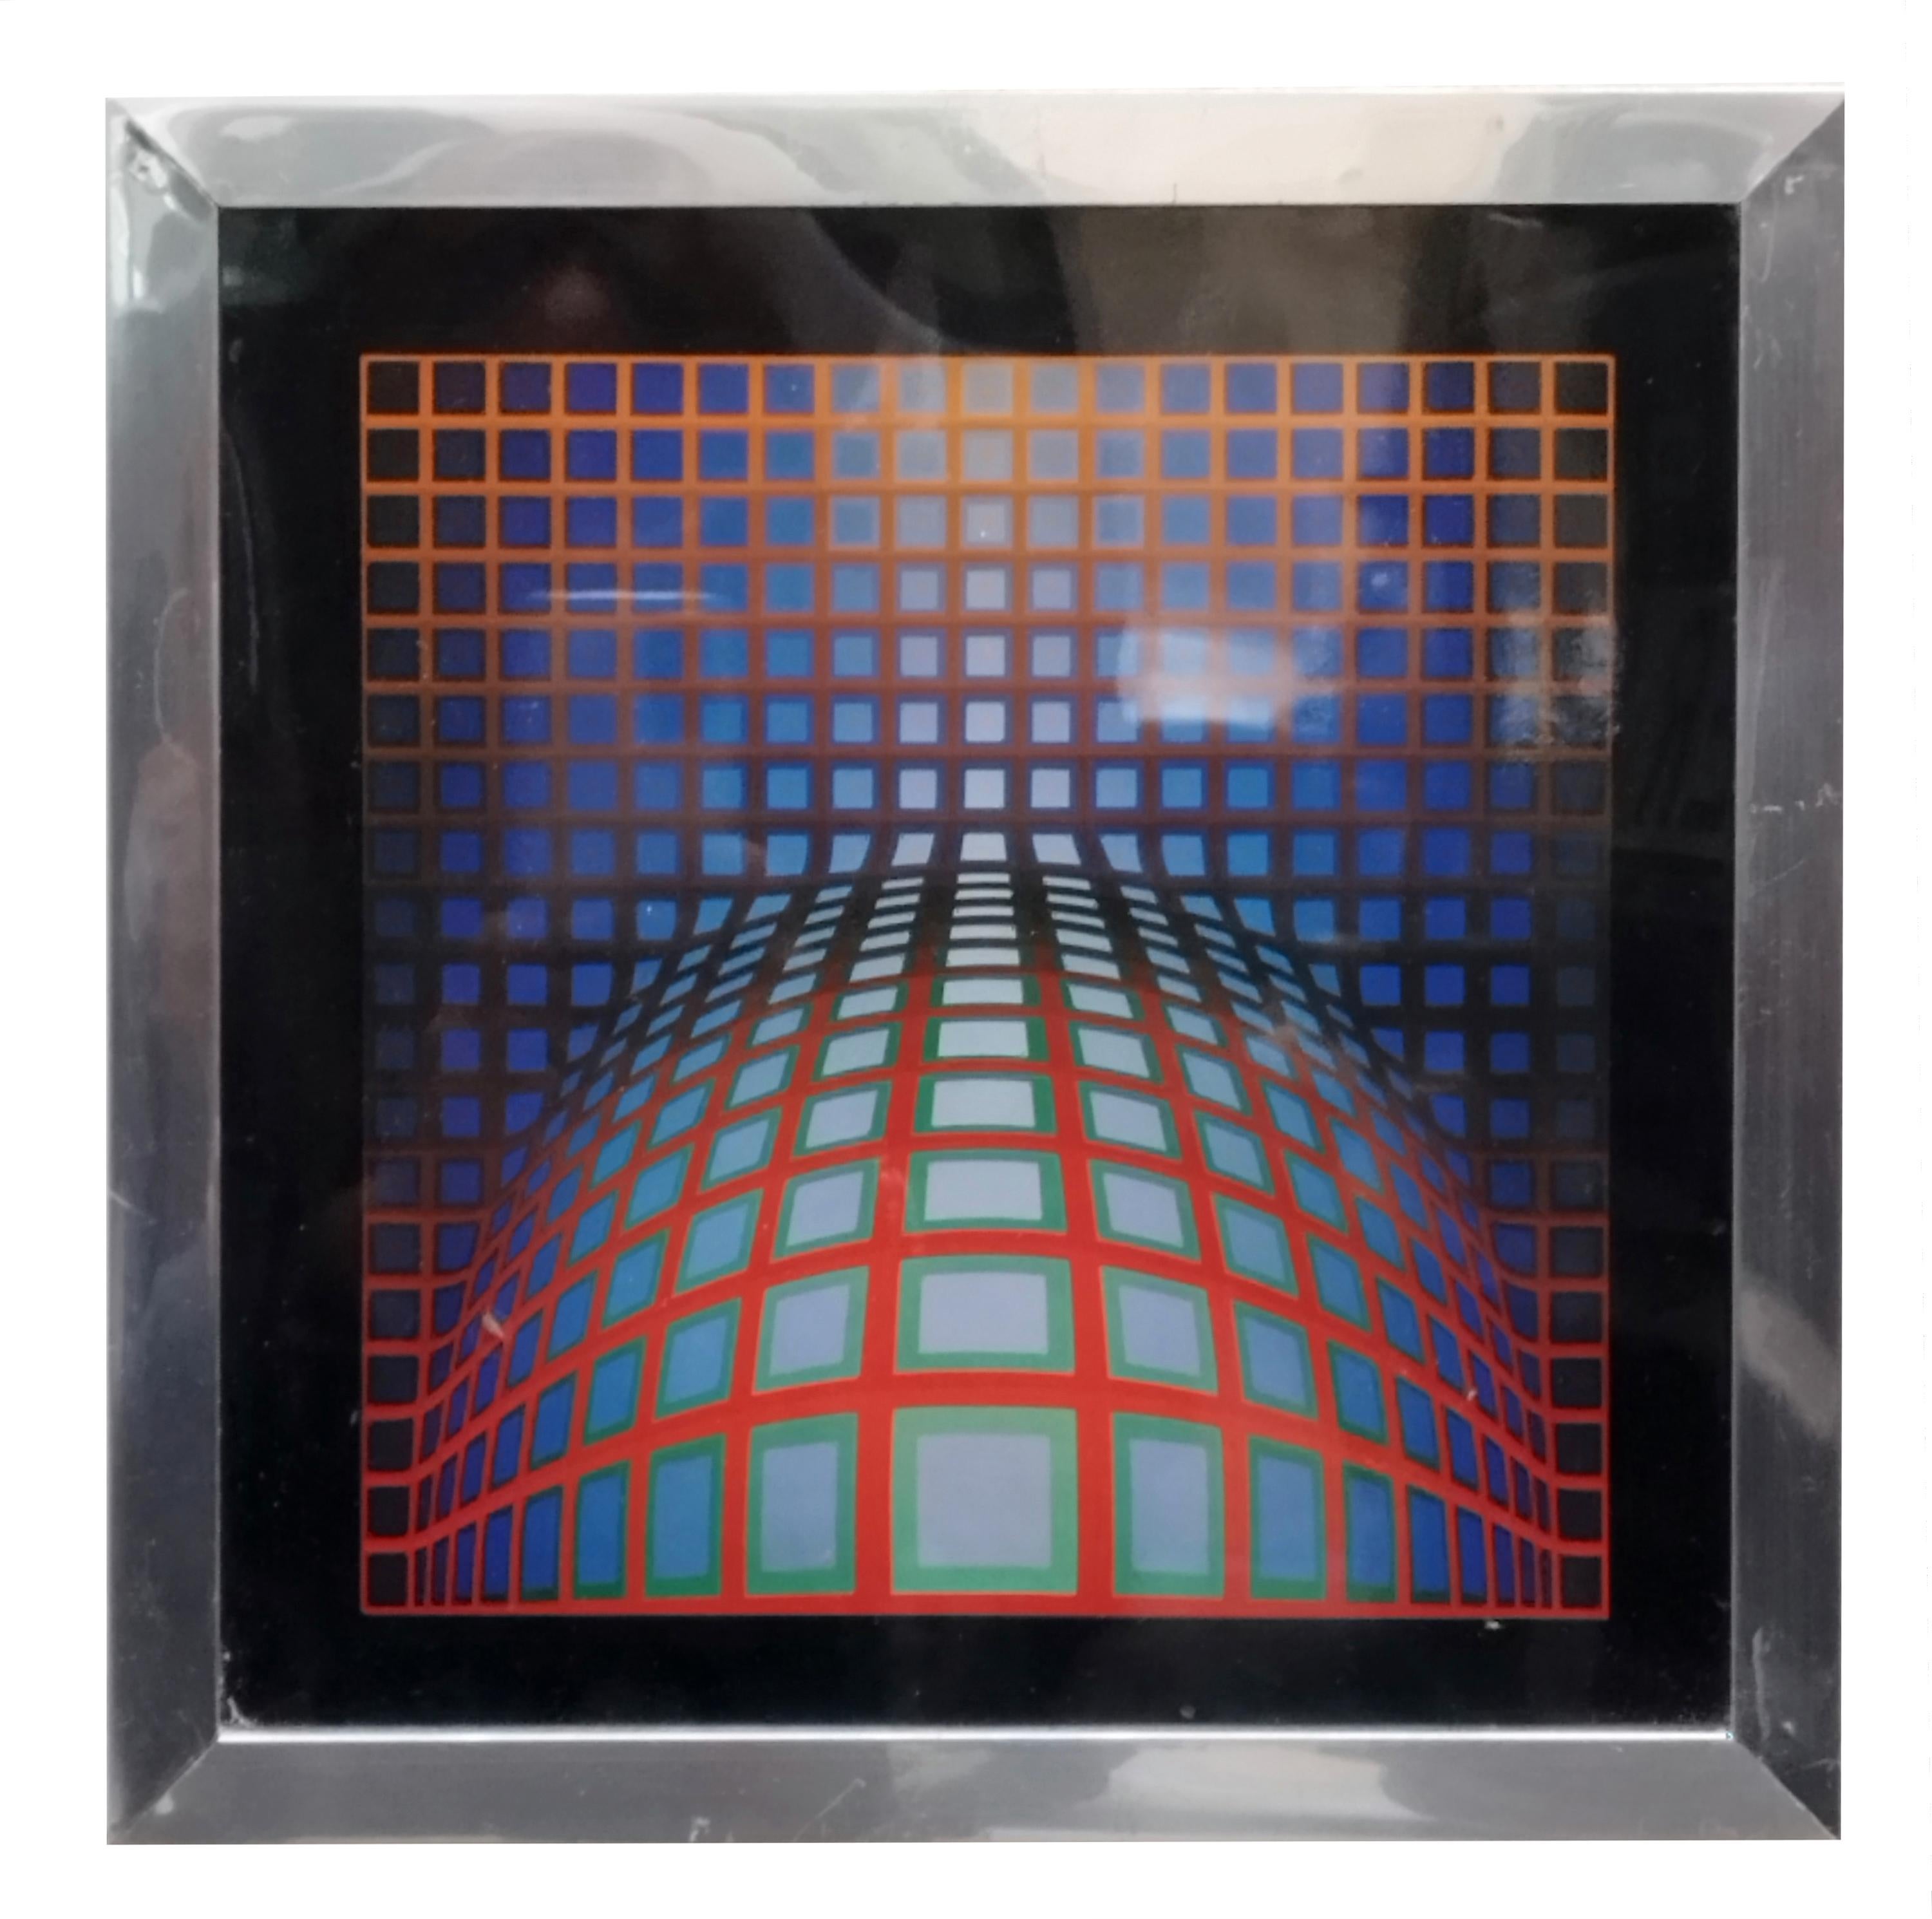 Kezdi-Vega by Victor Vasarely, 1971. Silkscreen on glossy paper, Griffon 1974 series, original chrome-plated metal frame of the time.

